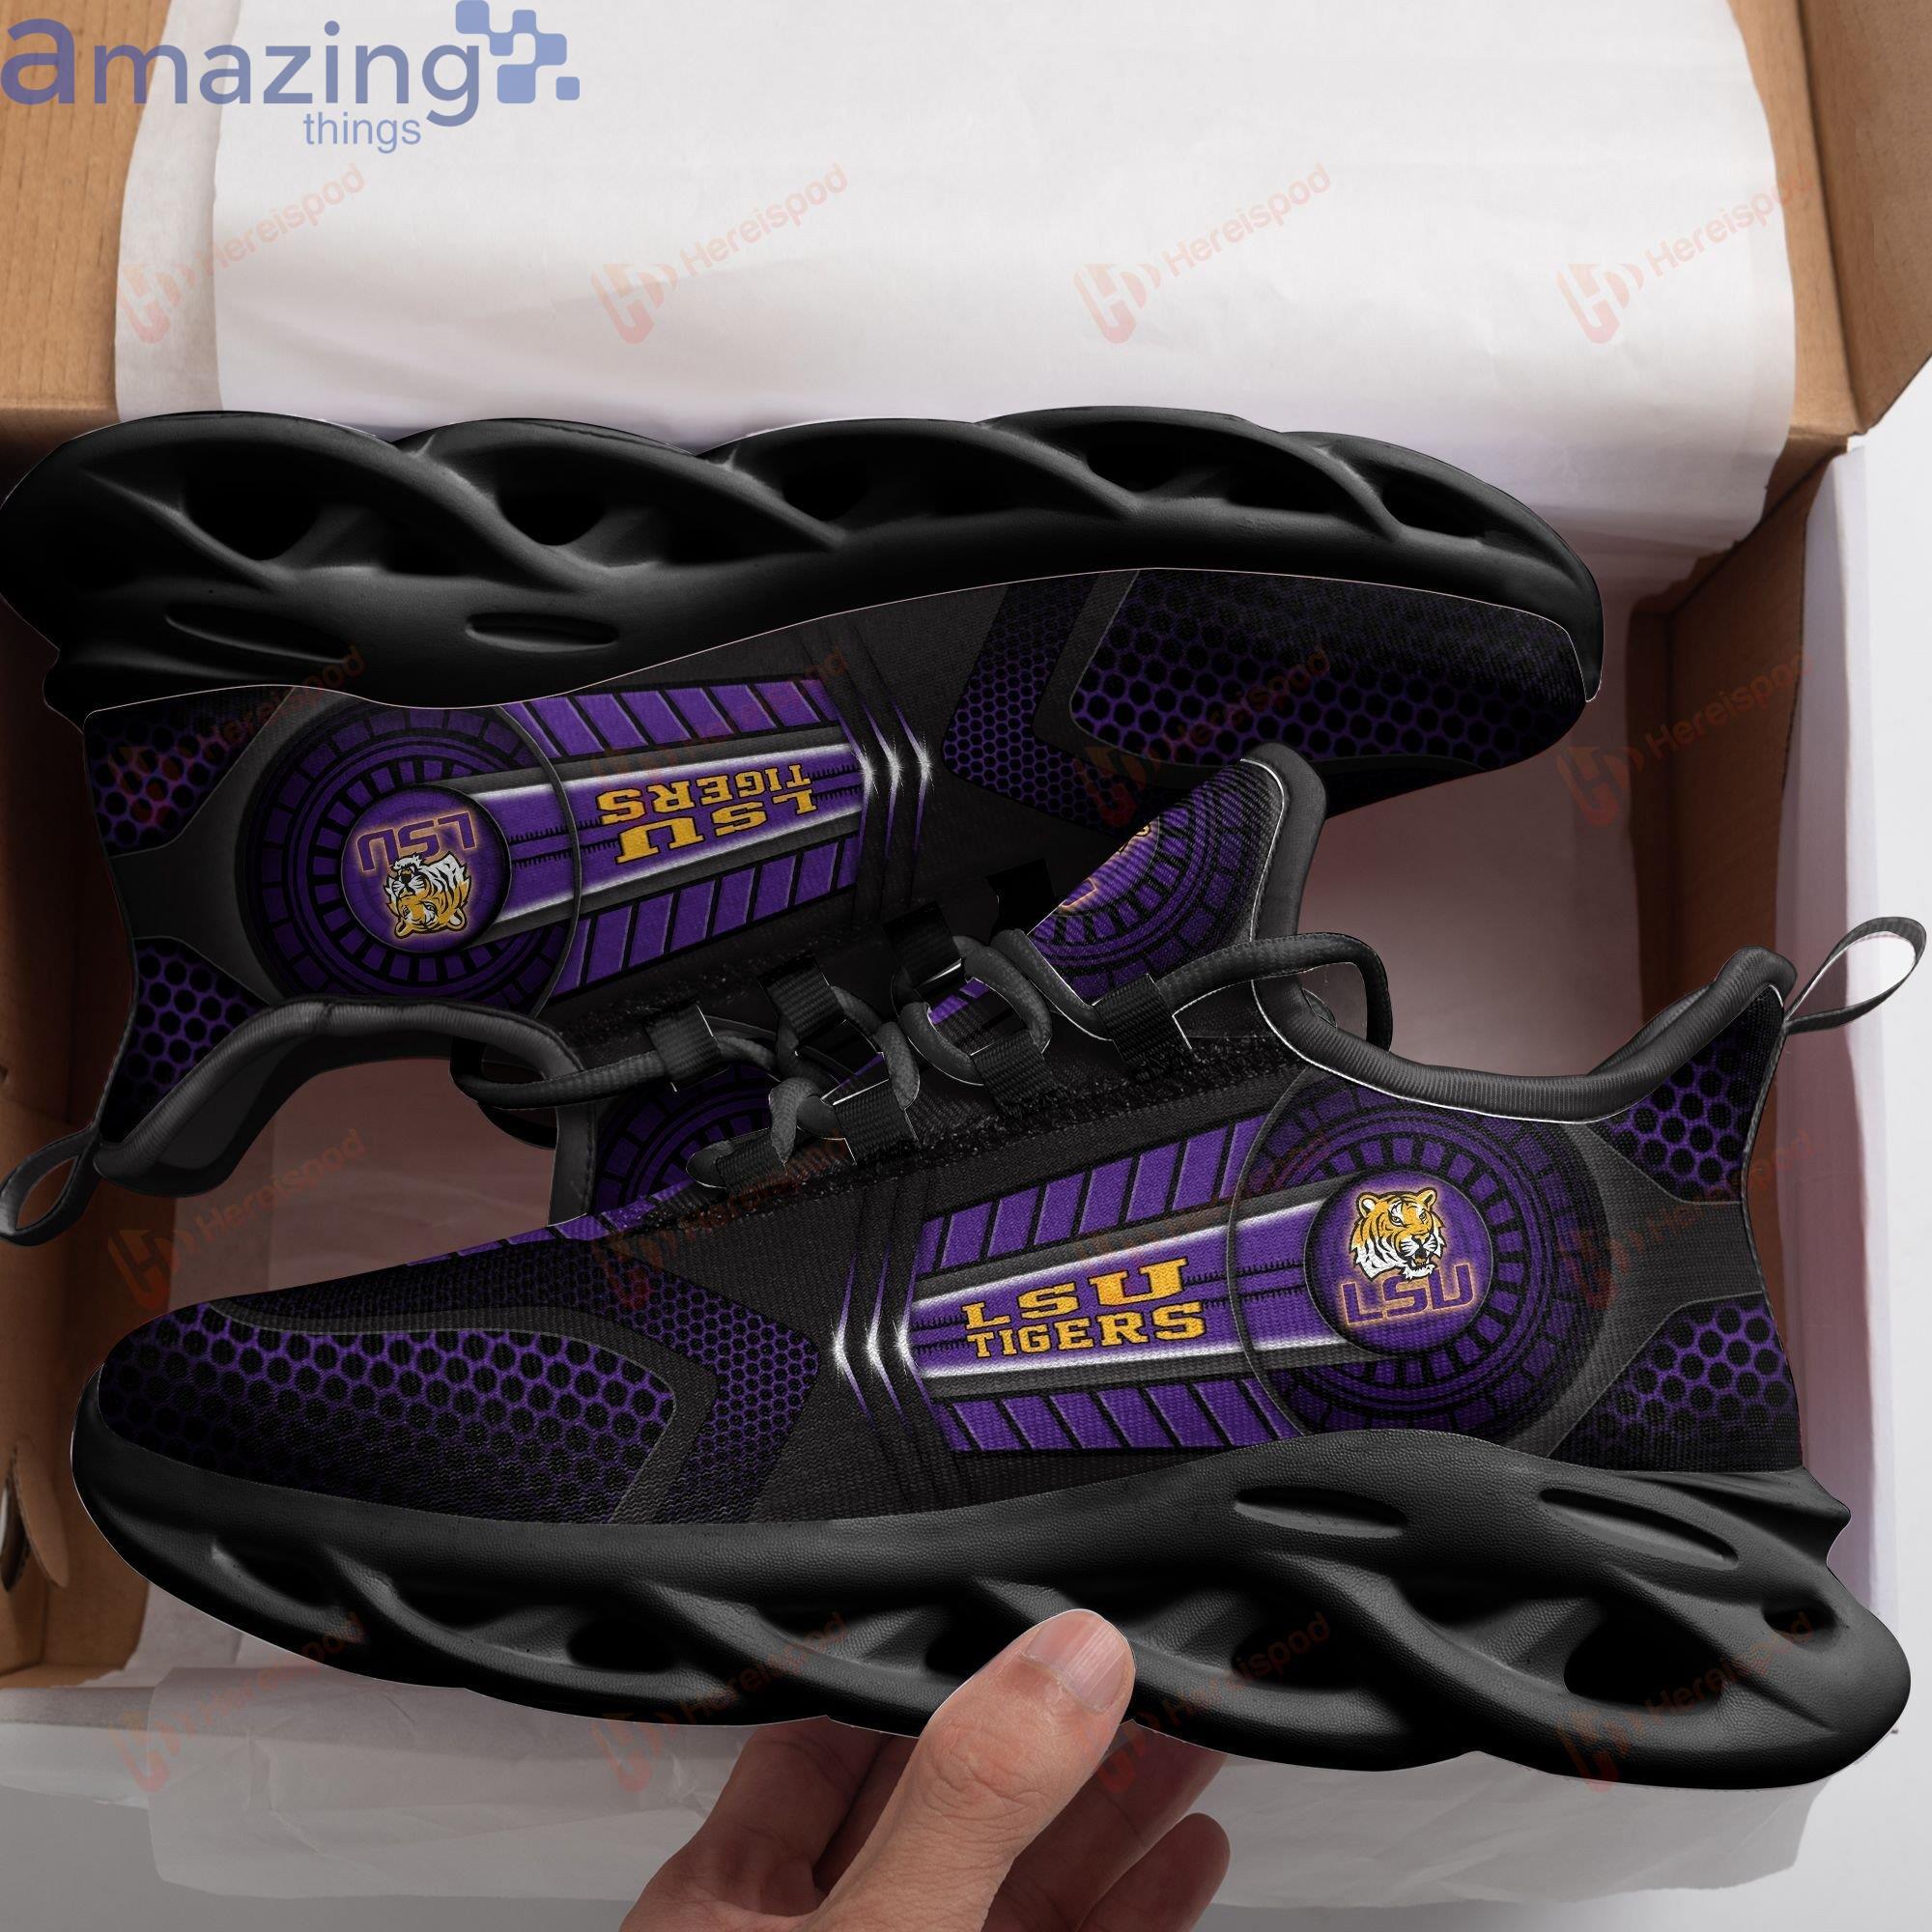 Lsu Tigers Max Soul Sneaker For Fans Product Photo 1